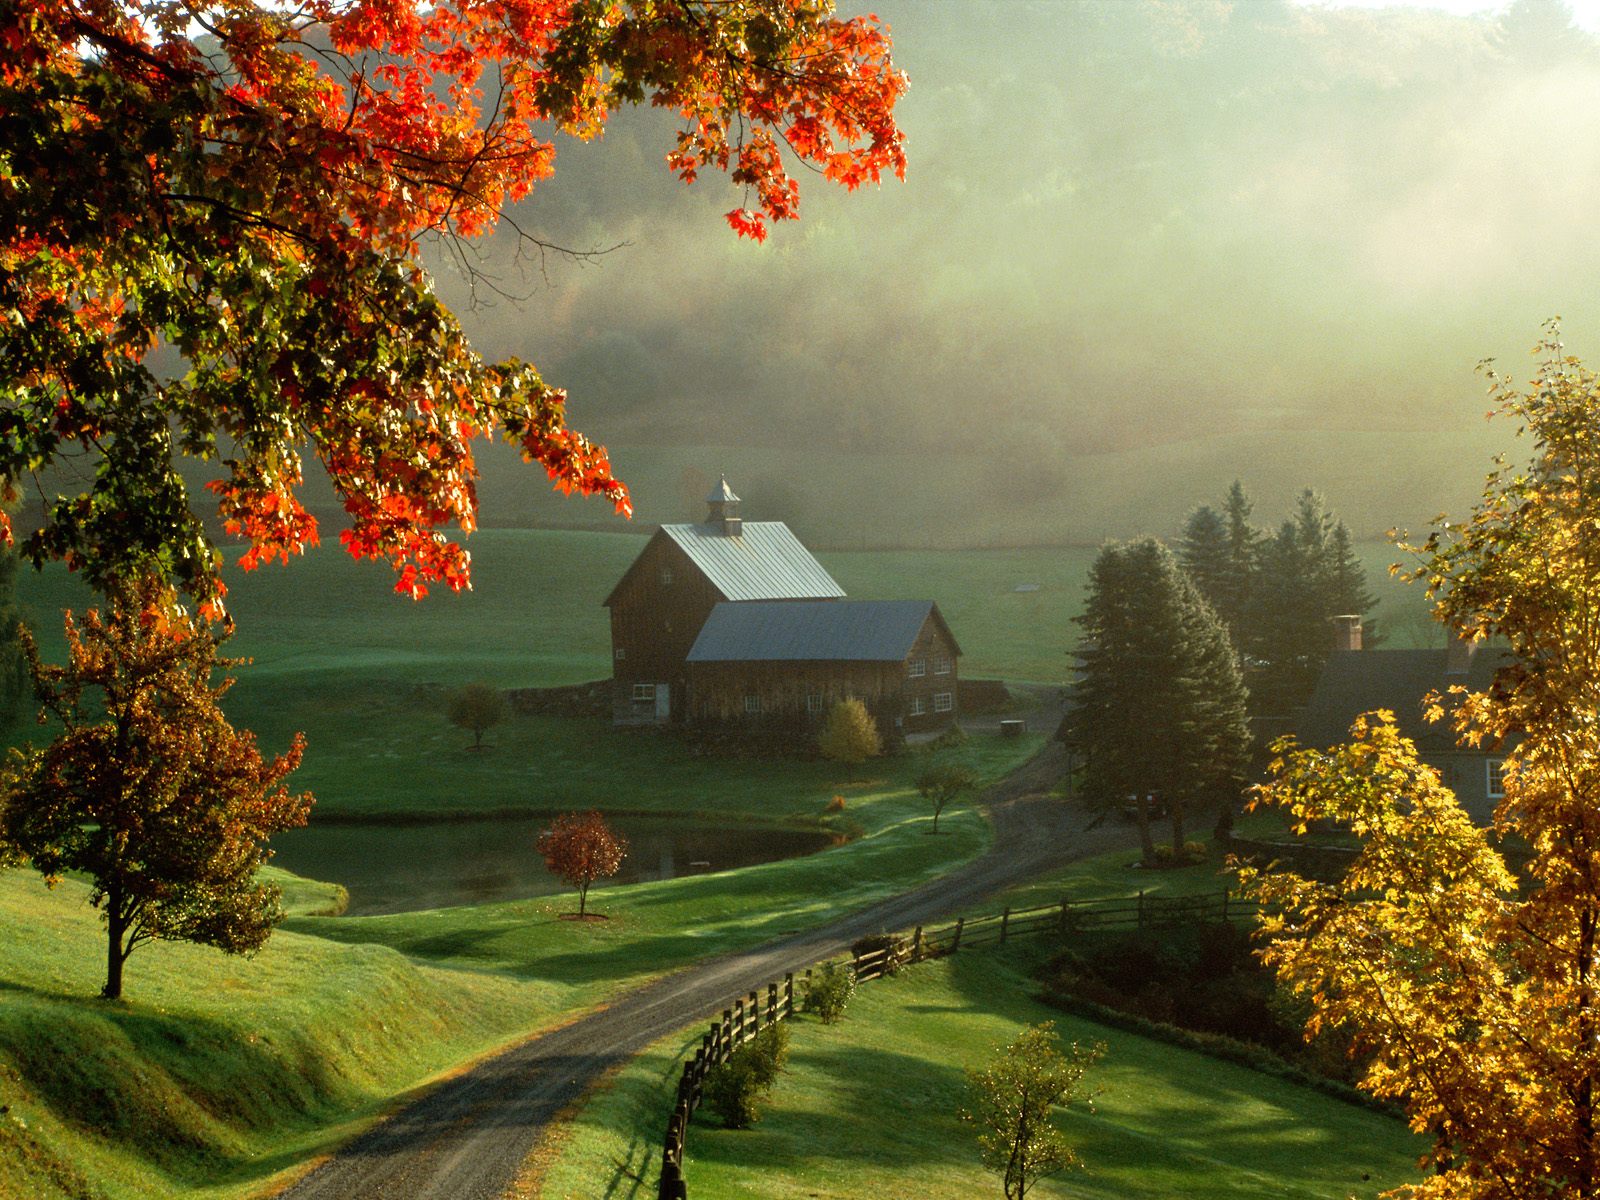  Farm Woodstock Vermont   Cool Backgrounds and Wallpapers for 1600x1200